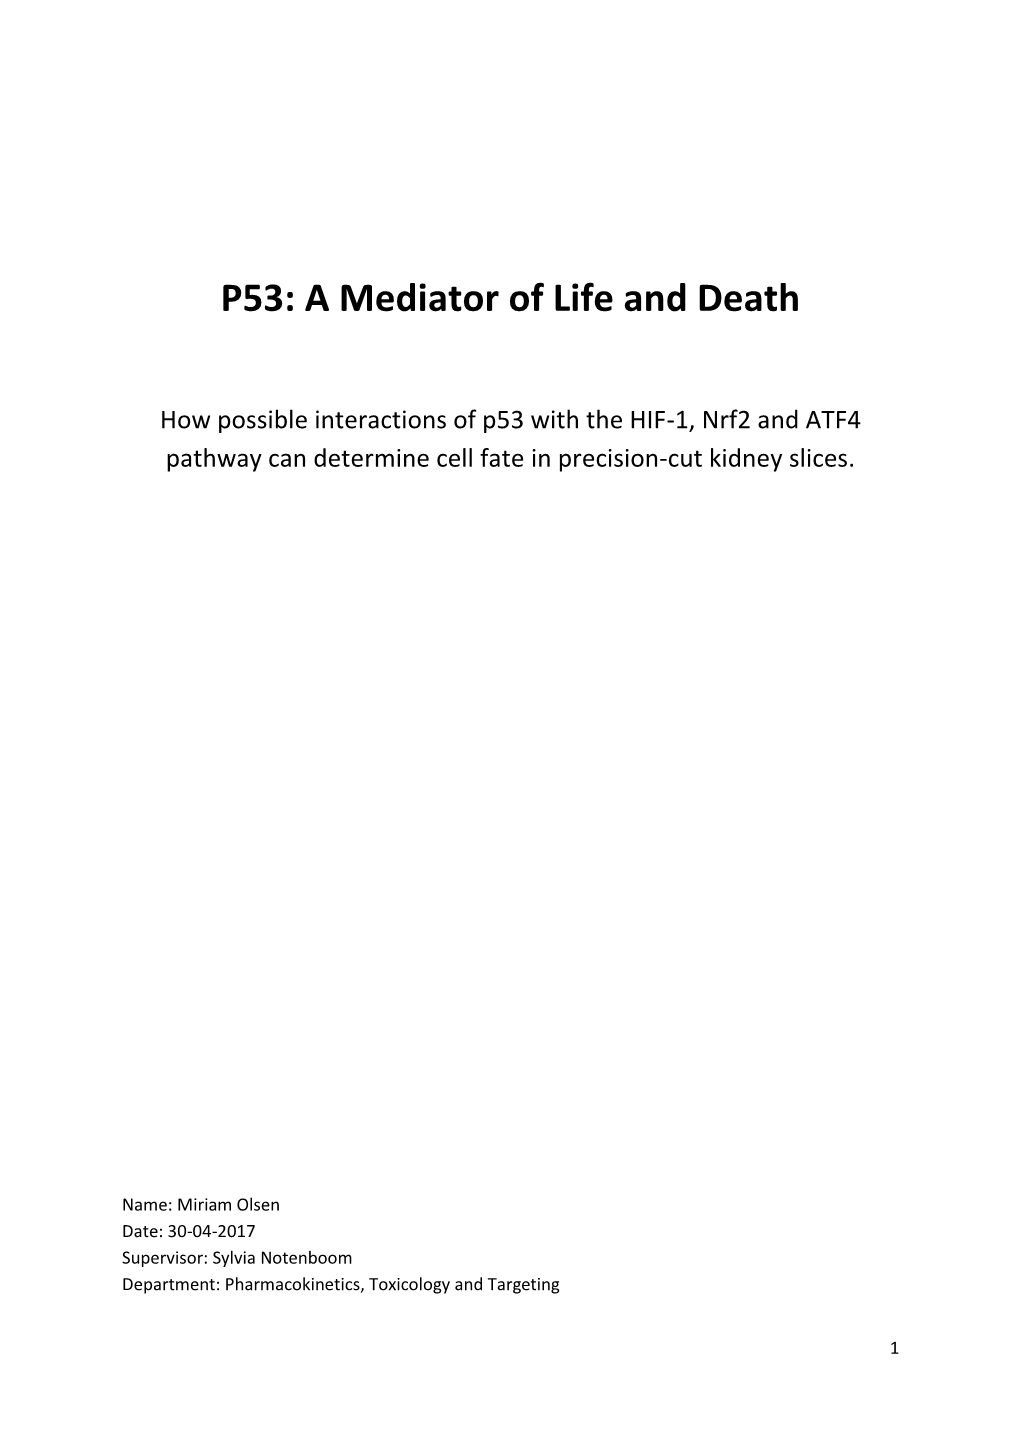 P53: a Mediator of Life and Death